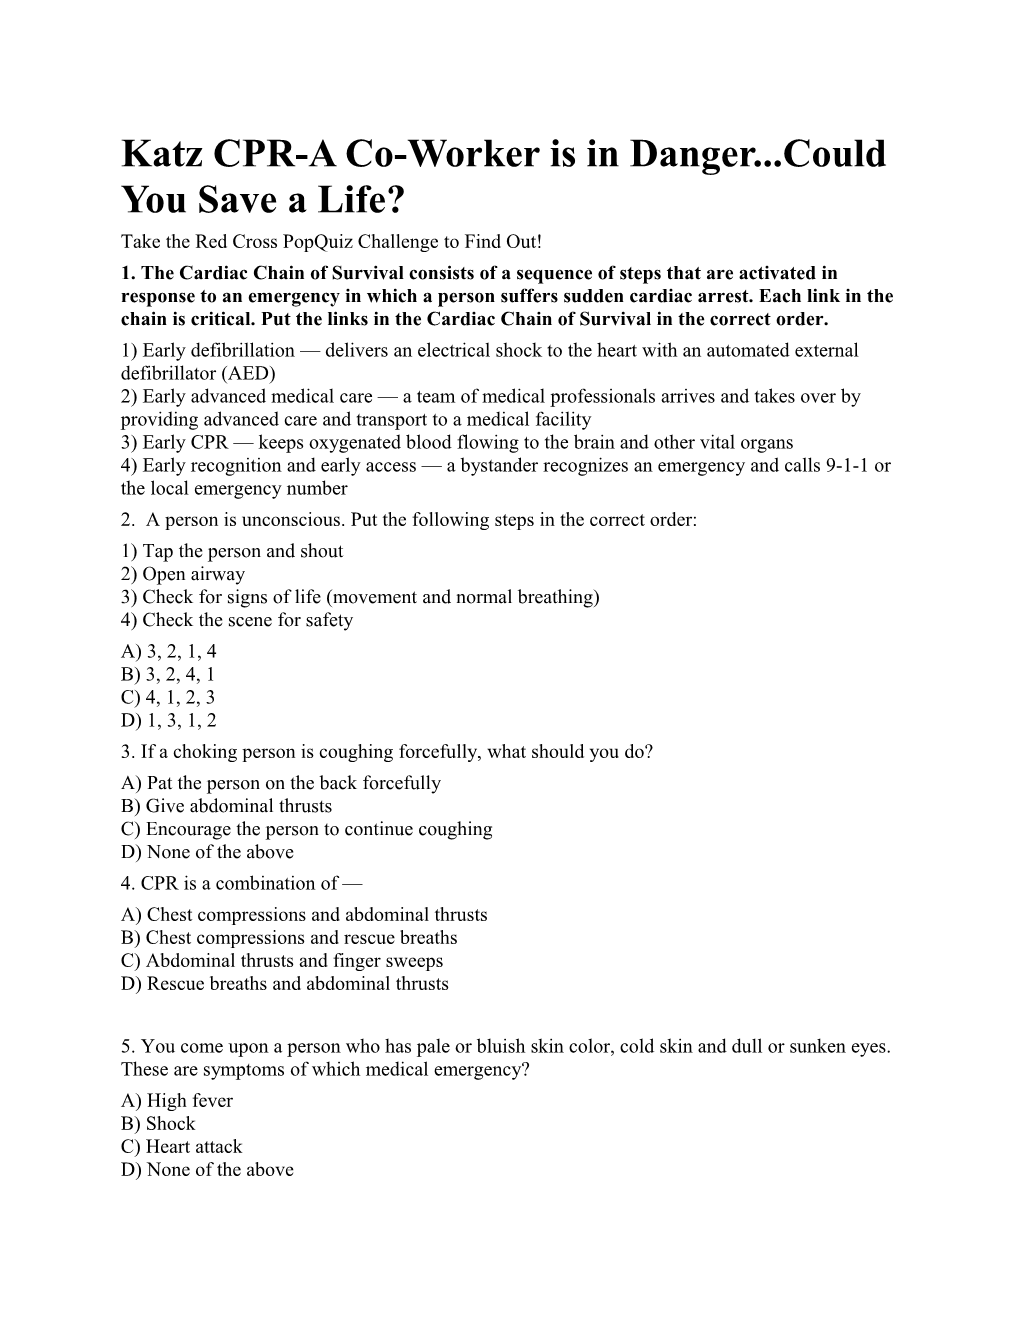 Katz CPR-A Co-Worker Is in Danger Could You Save a Life?